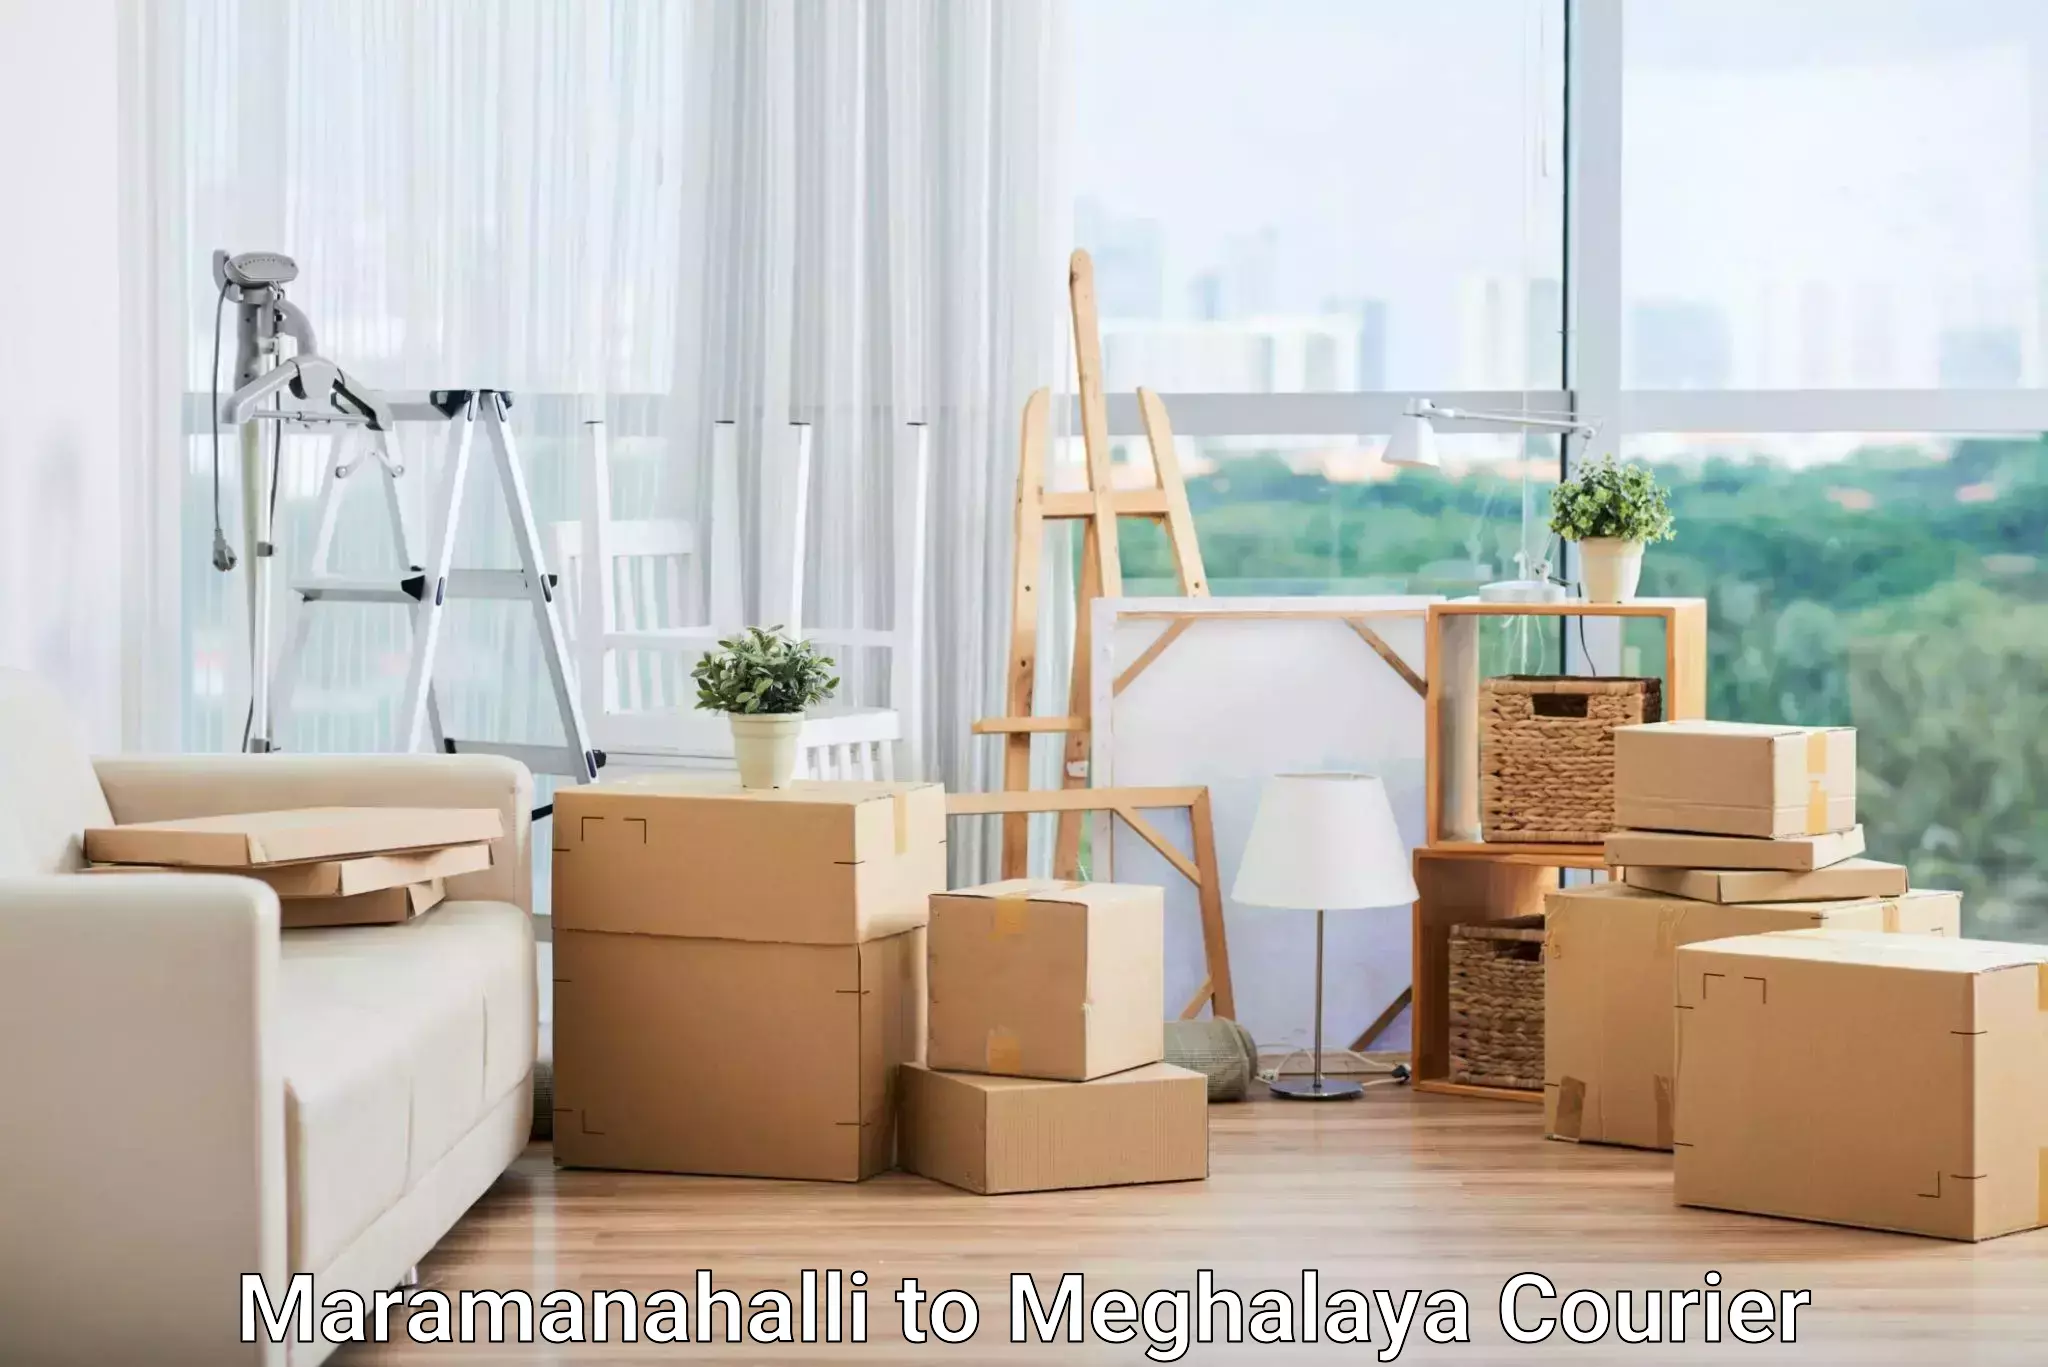 Reliable courier service in Maramanahalli to Nongpoh